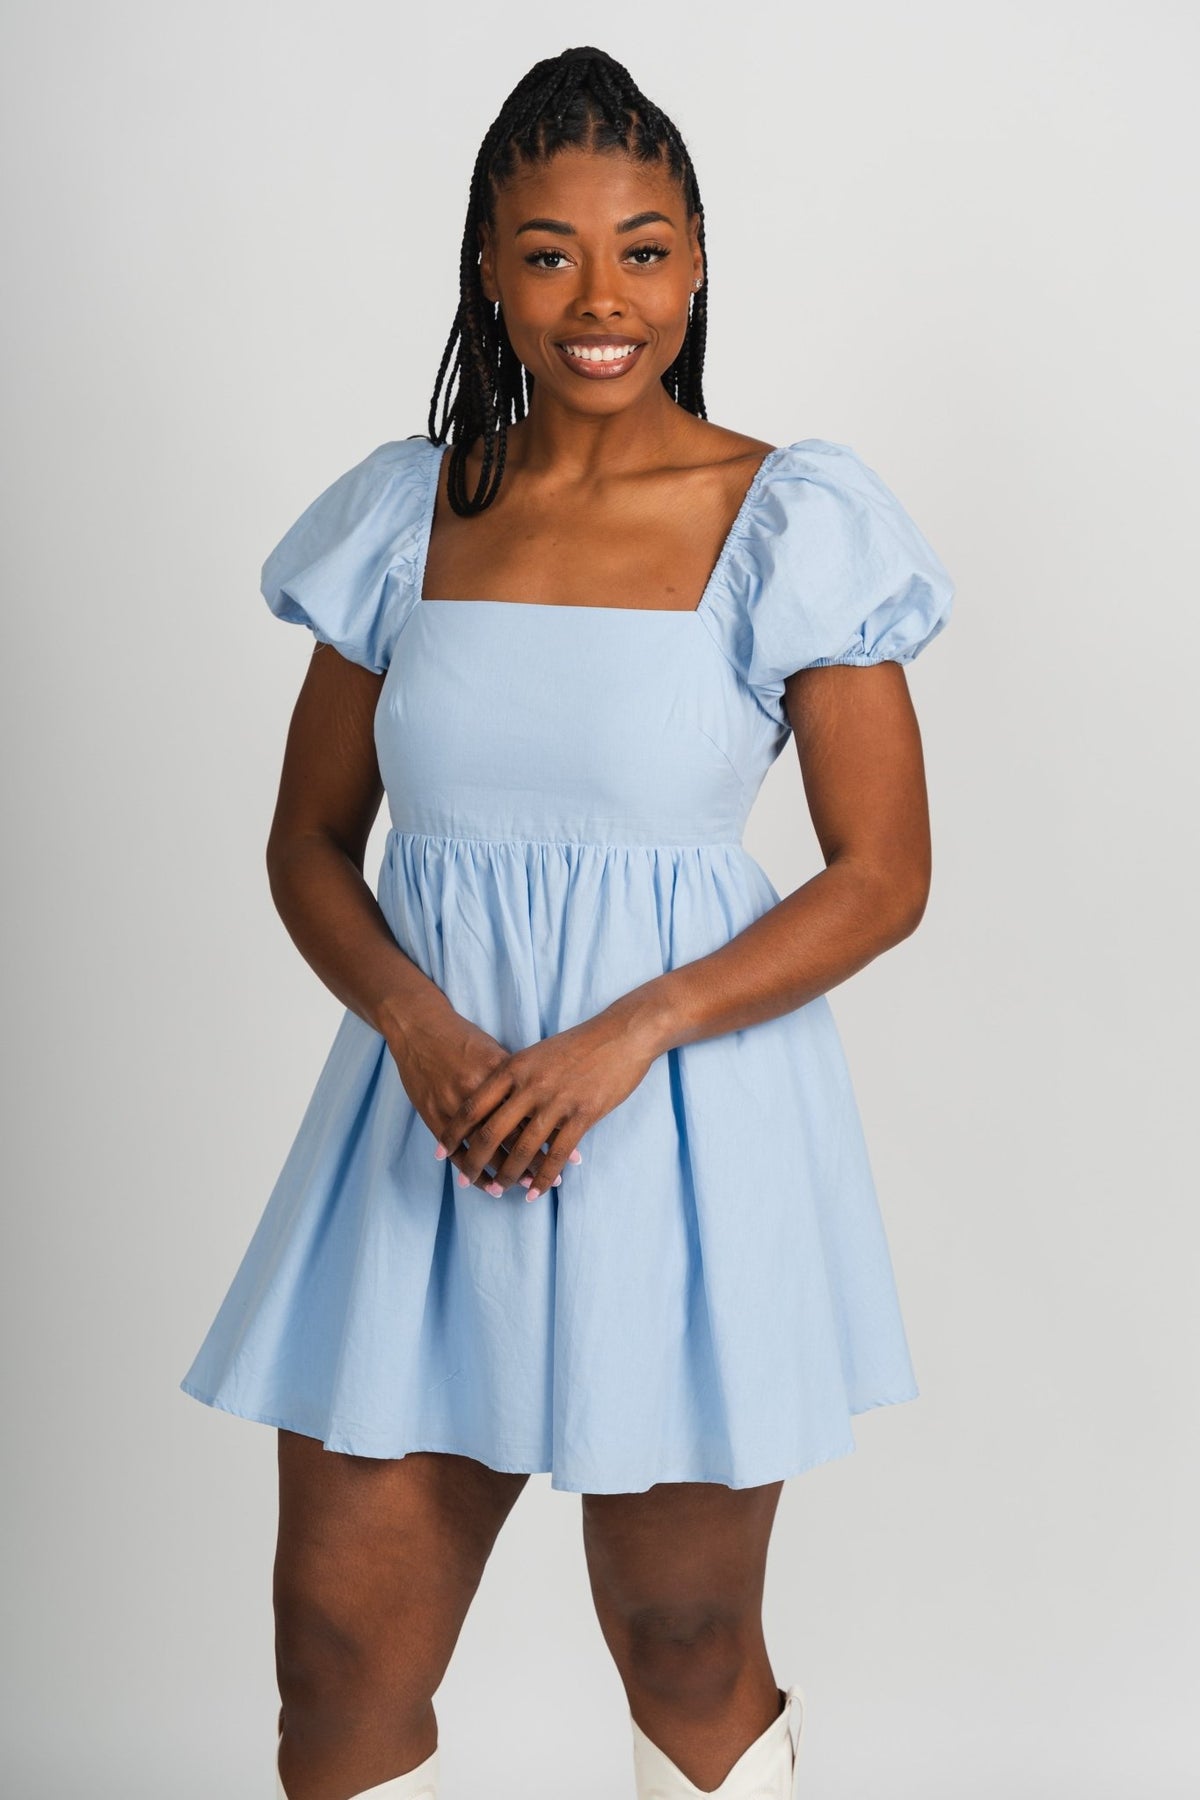 Puff sleeve babydoll dress light blue - Cute dress - Trendy Dresses at Lush Fashion Lounge Boutique in Oklahoma City